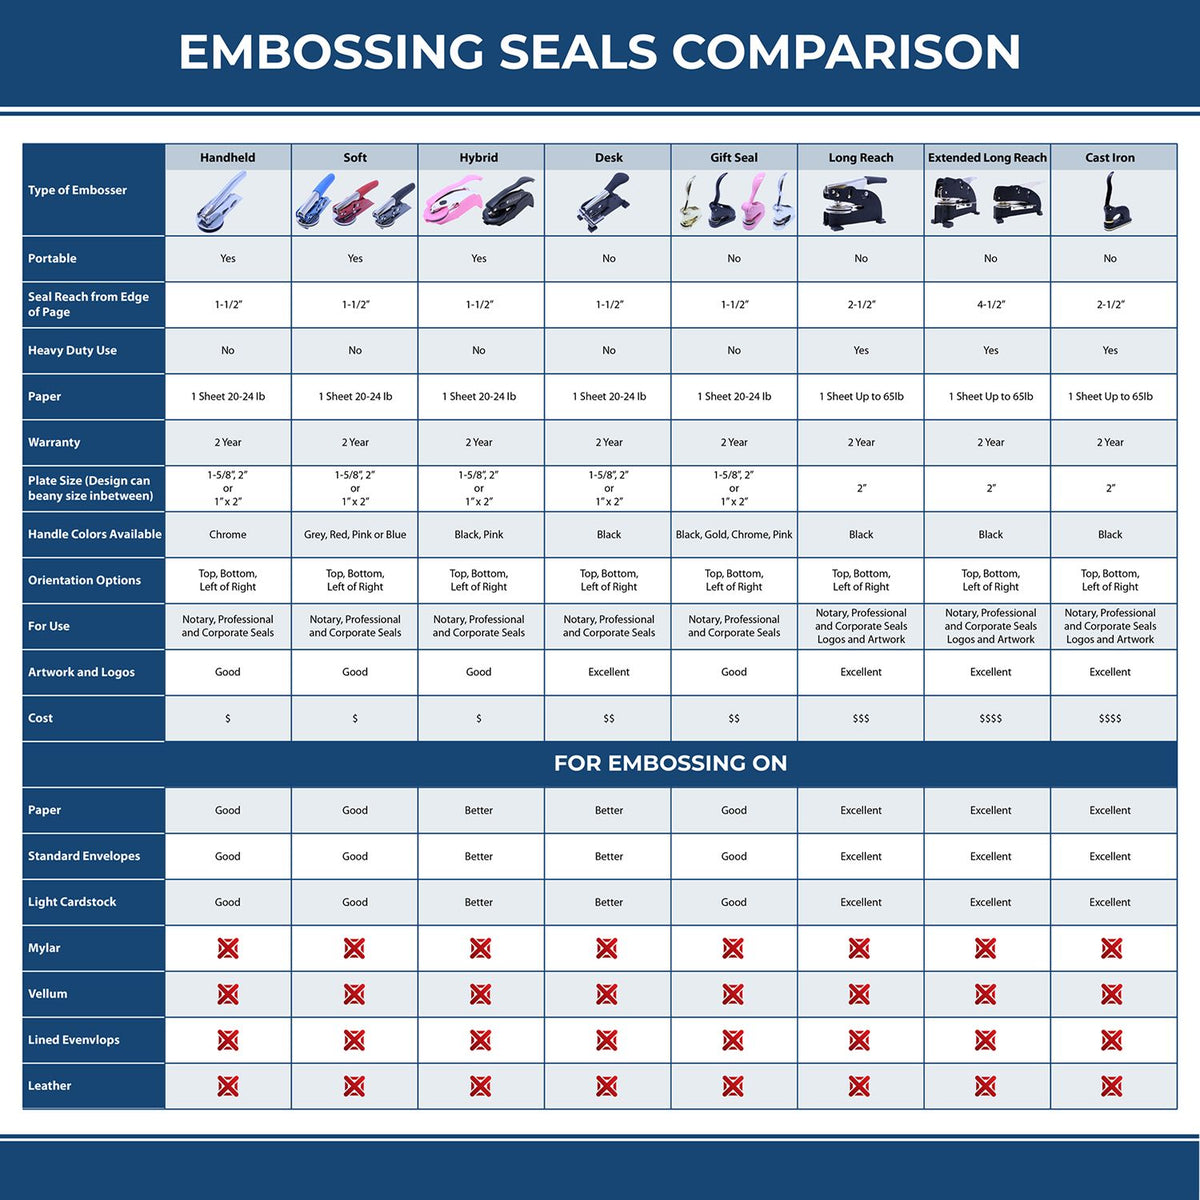 A comparison chart for the different types of mount models available for the Extended Long Reach North Dakota Architect Seal Embosser.